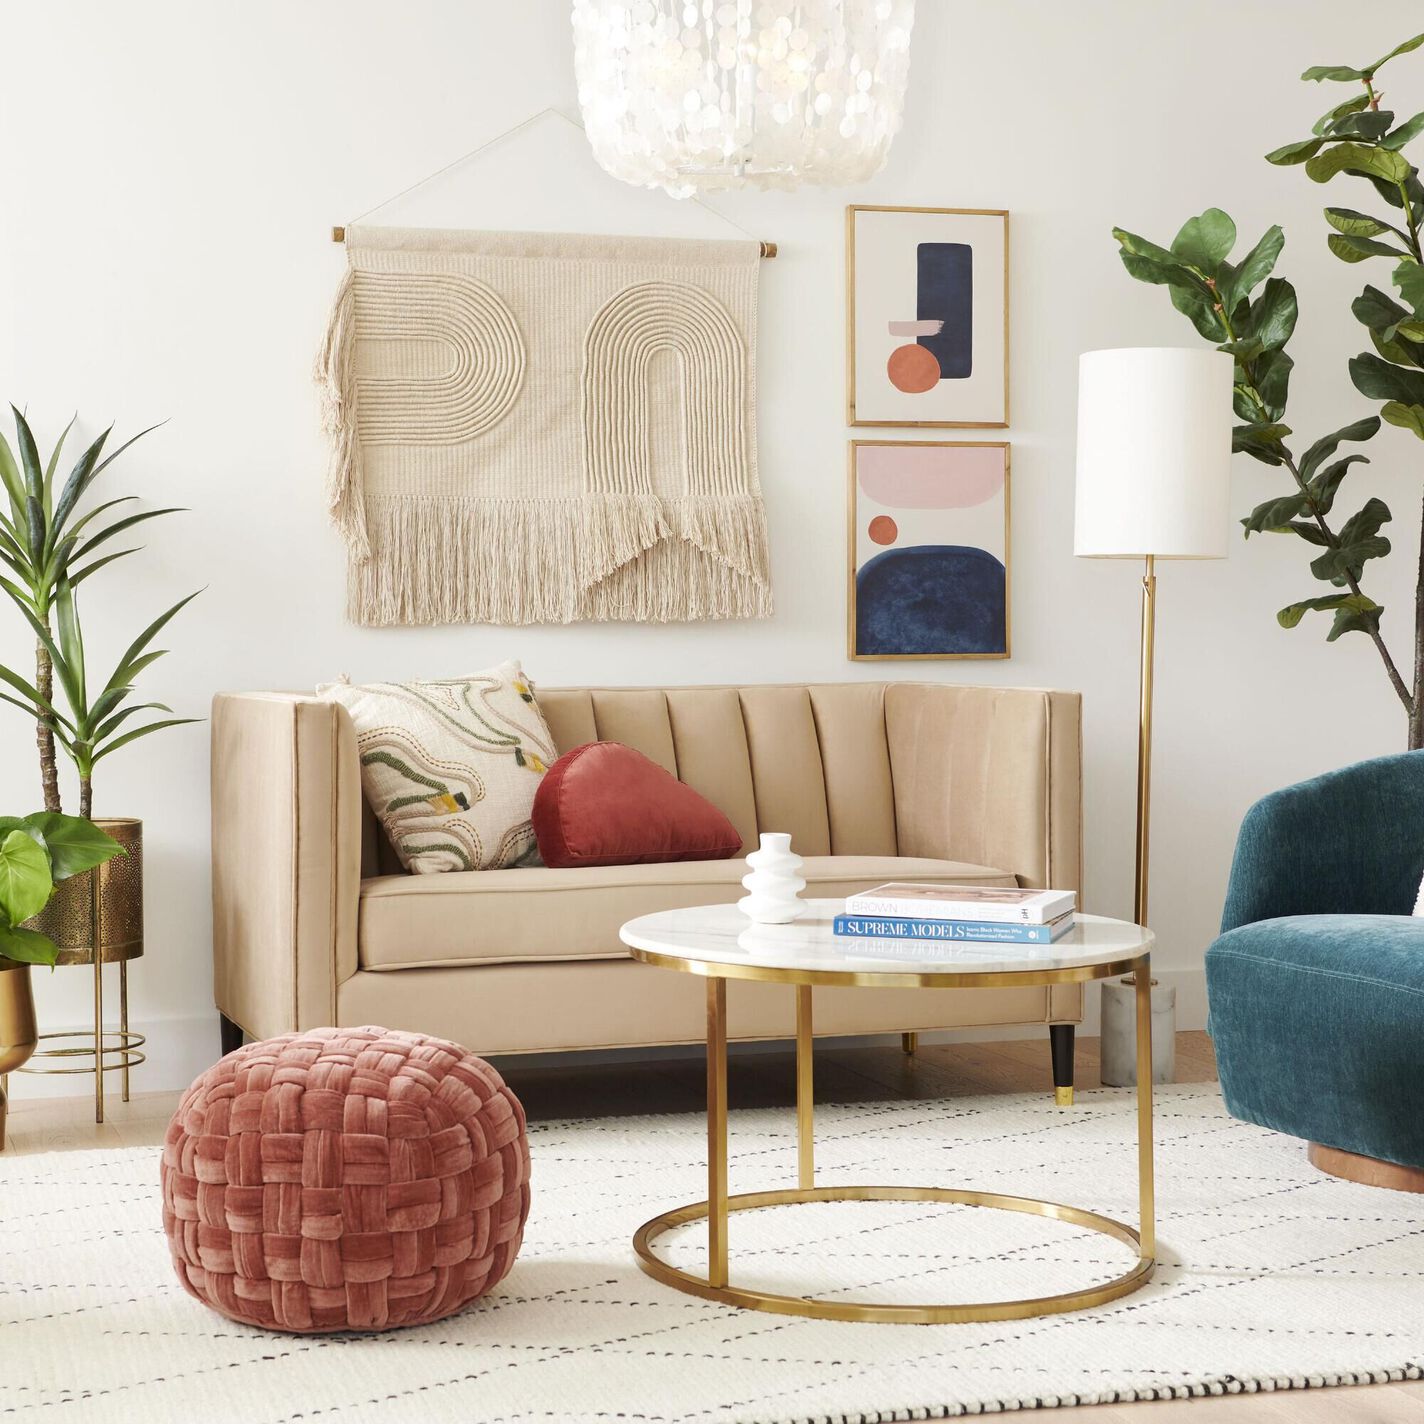 A modern living room features a beige sofa with a red cushion and a decorative pillow, a woven wall hanging above, and two abstract framed artworks. A green armchair, a marble coffee table with gold legs, a round textured red ottoman, and plants complete the space.